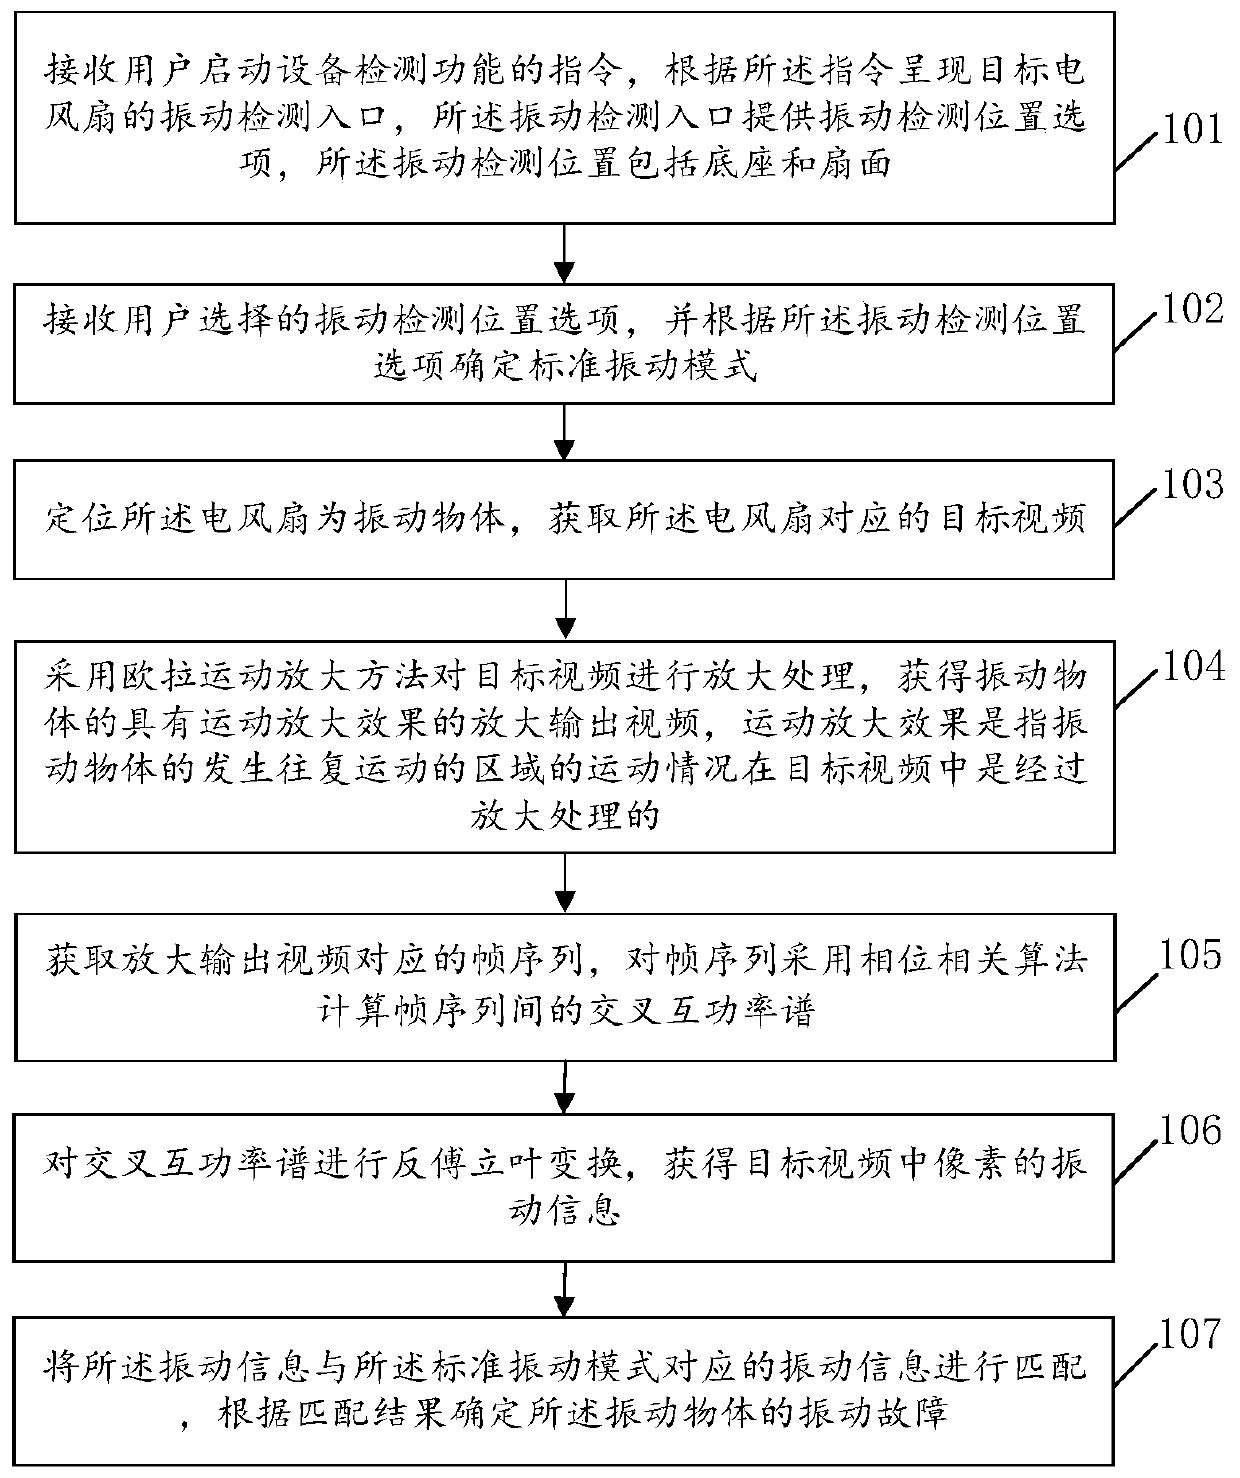 Electric fan vibration fault detection method and device